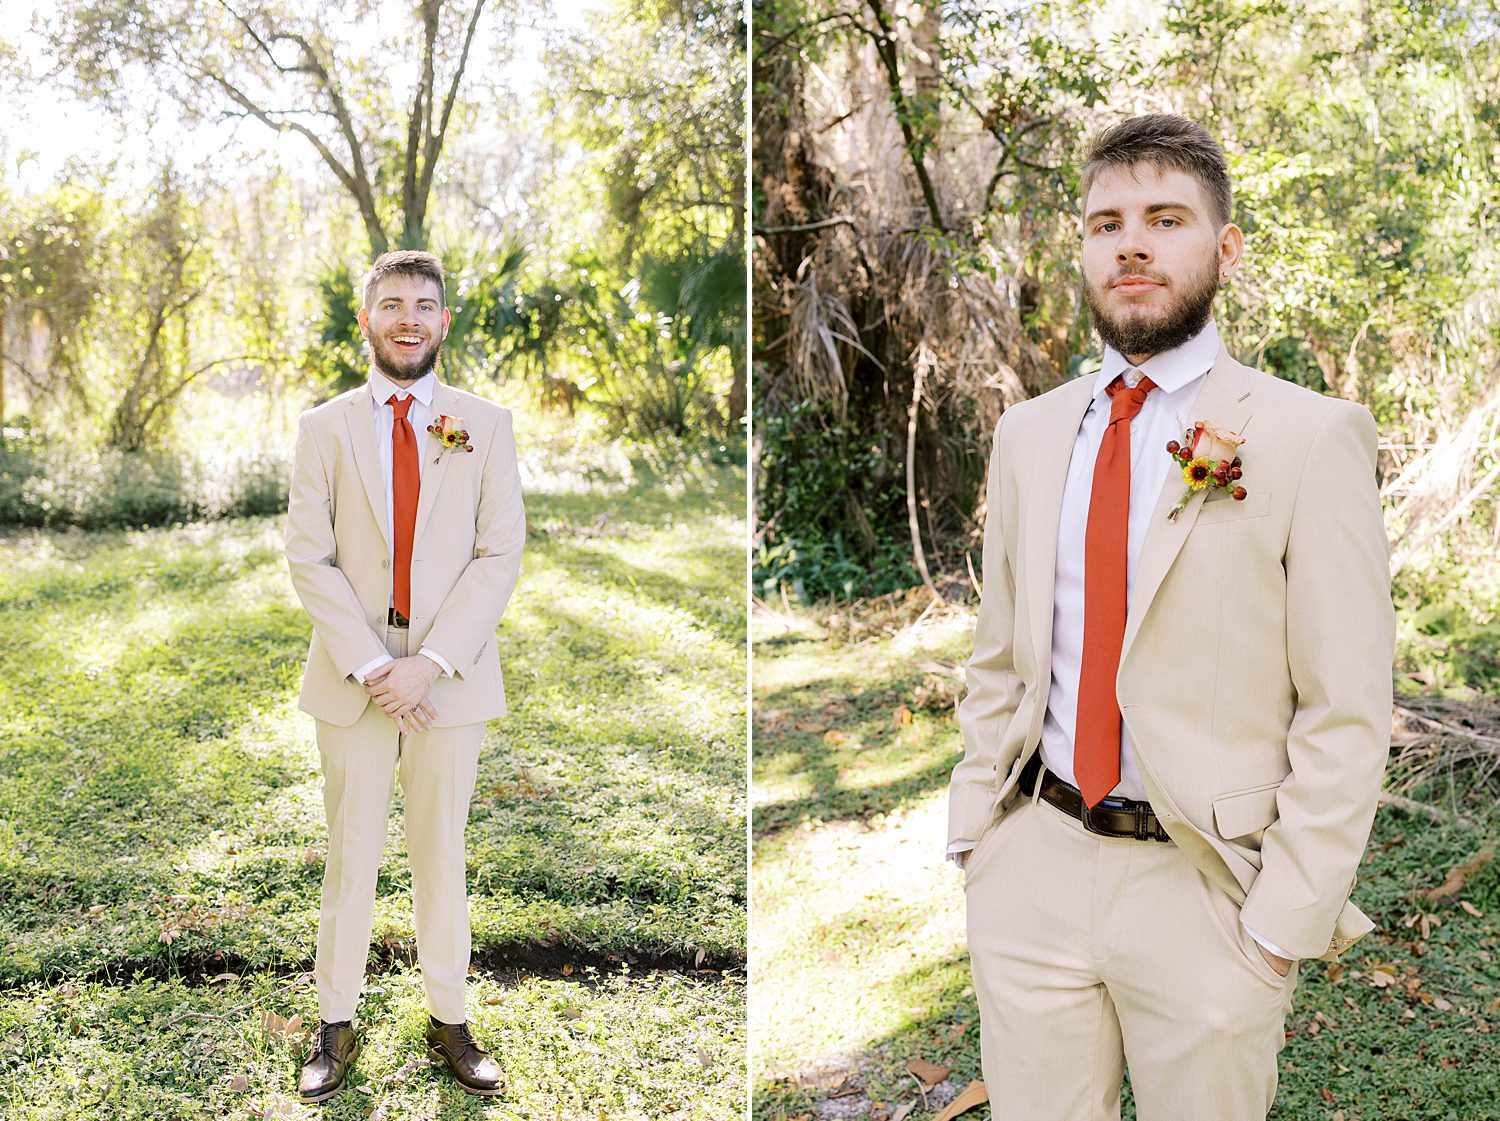 groom stands with hands in suit pockets at Events Under the Oaks